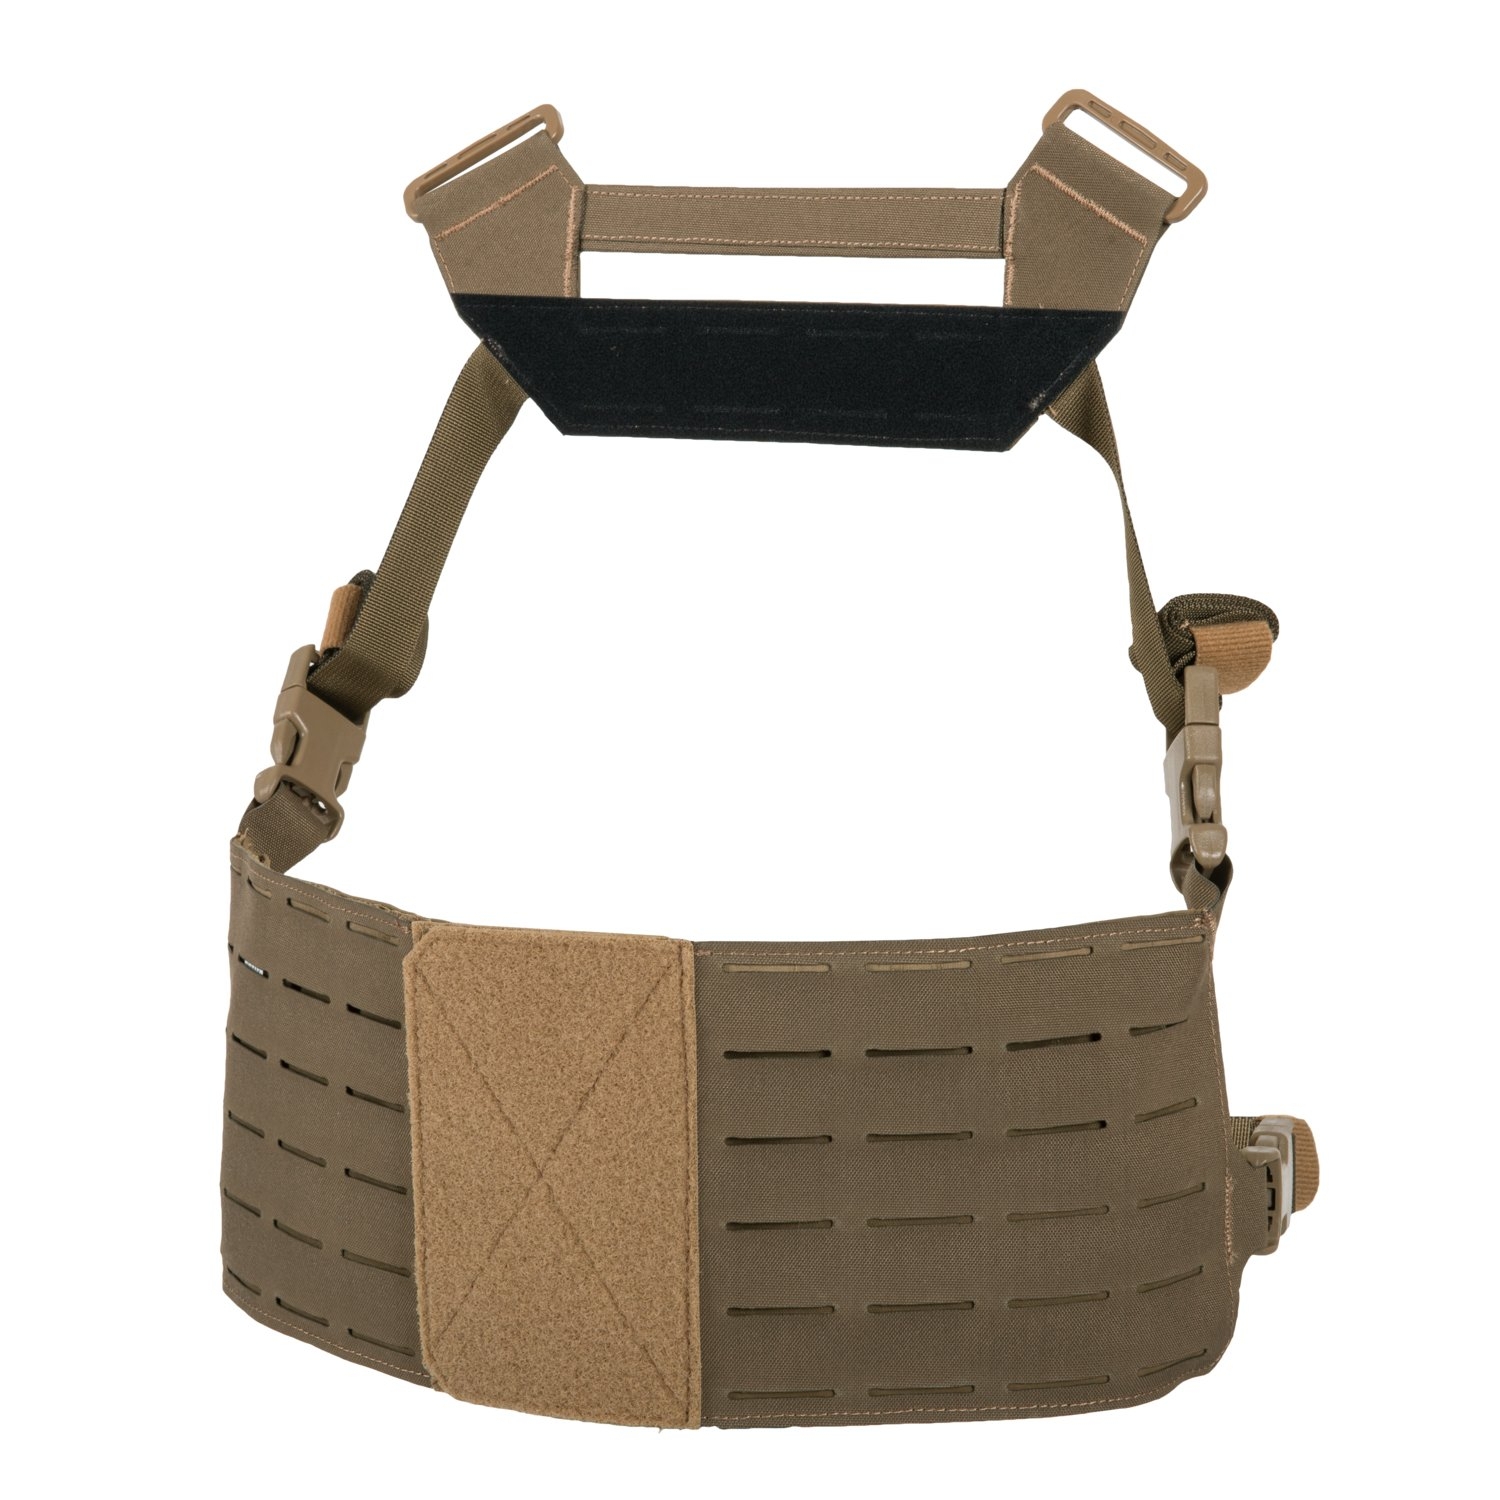 Image of Panel DIRECT ACTION Modułowy Spitfire MK II Chest Rig Interface - Cordura - Coyote Brown - One Size (PC-SPCI-CD5-CBR)